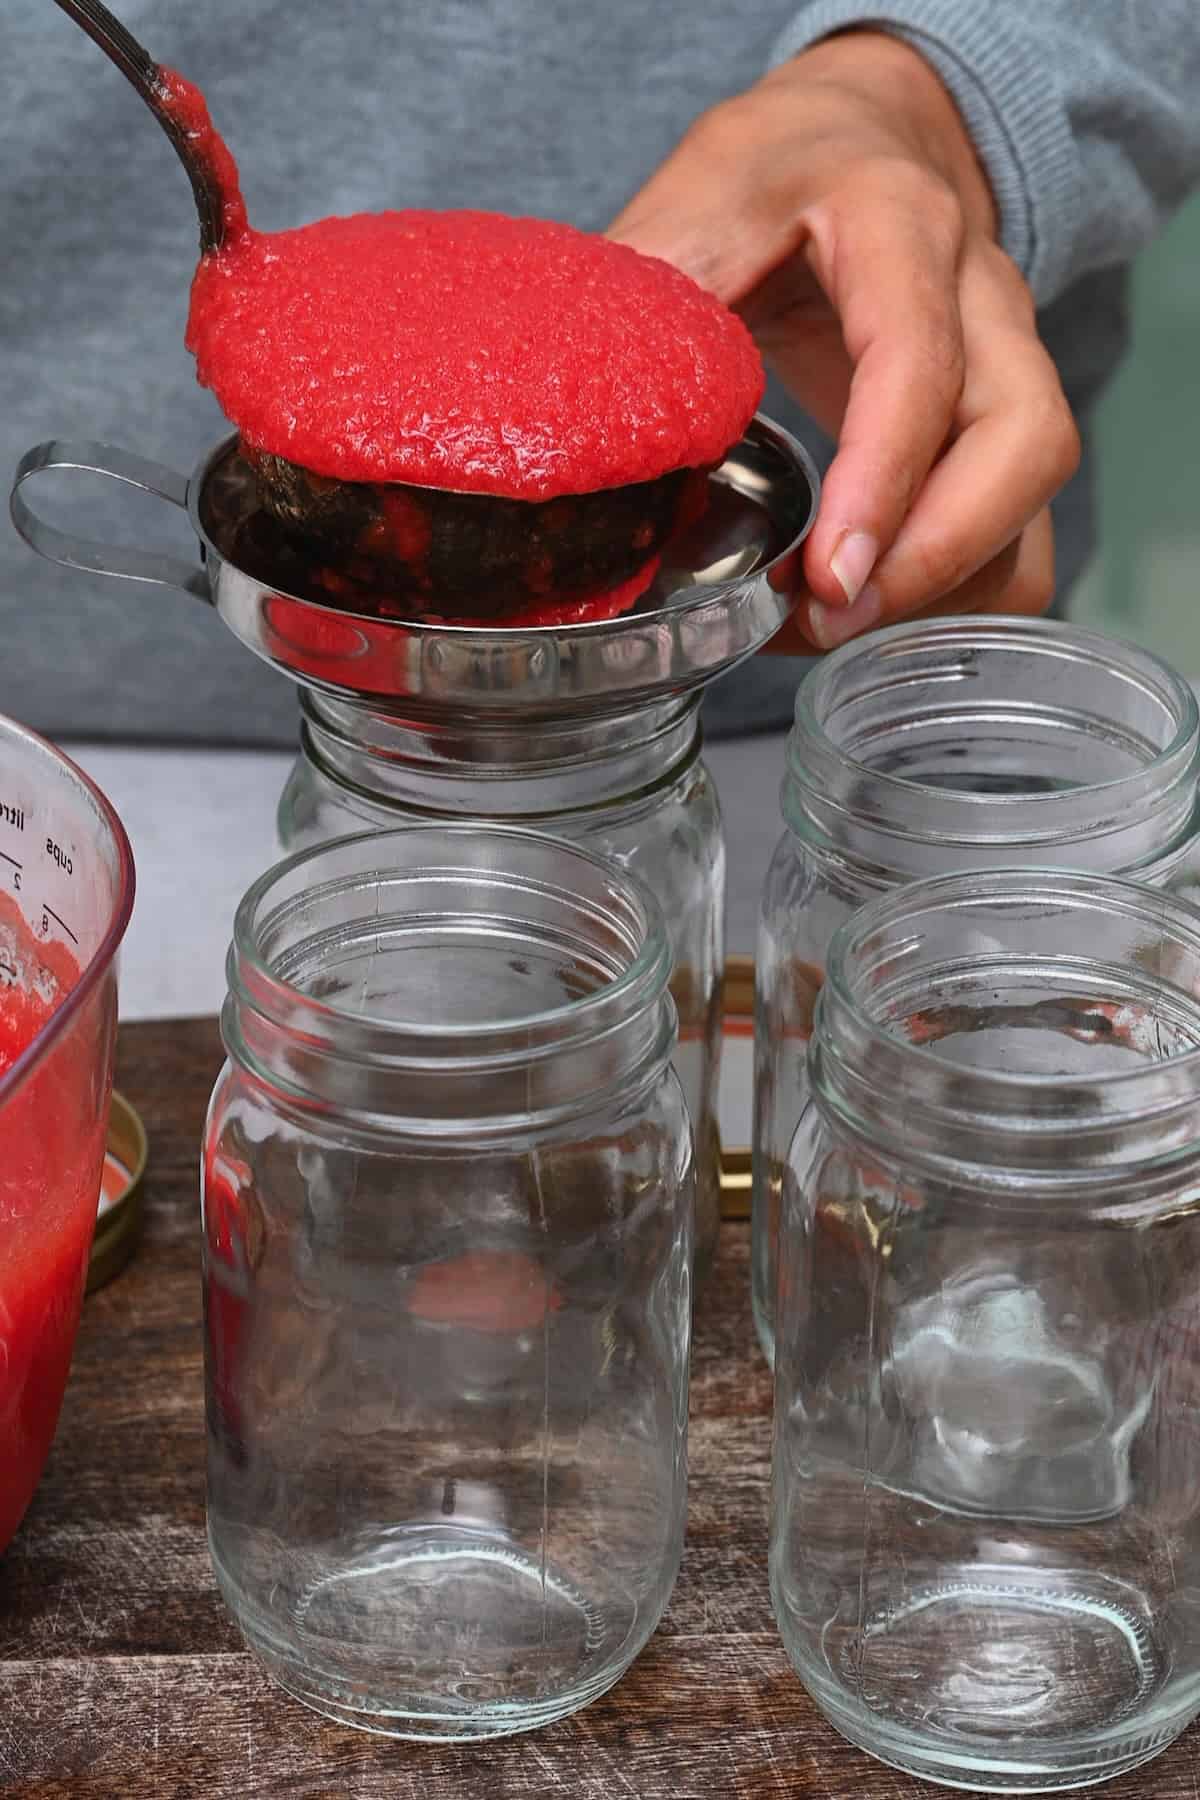 Filling jars with tomato puree